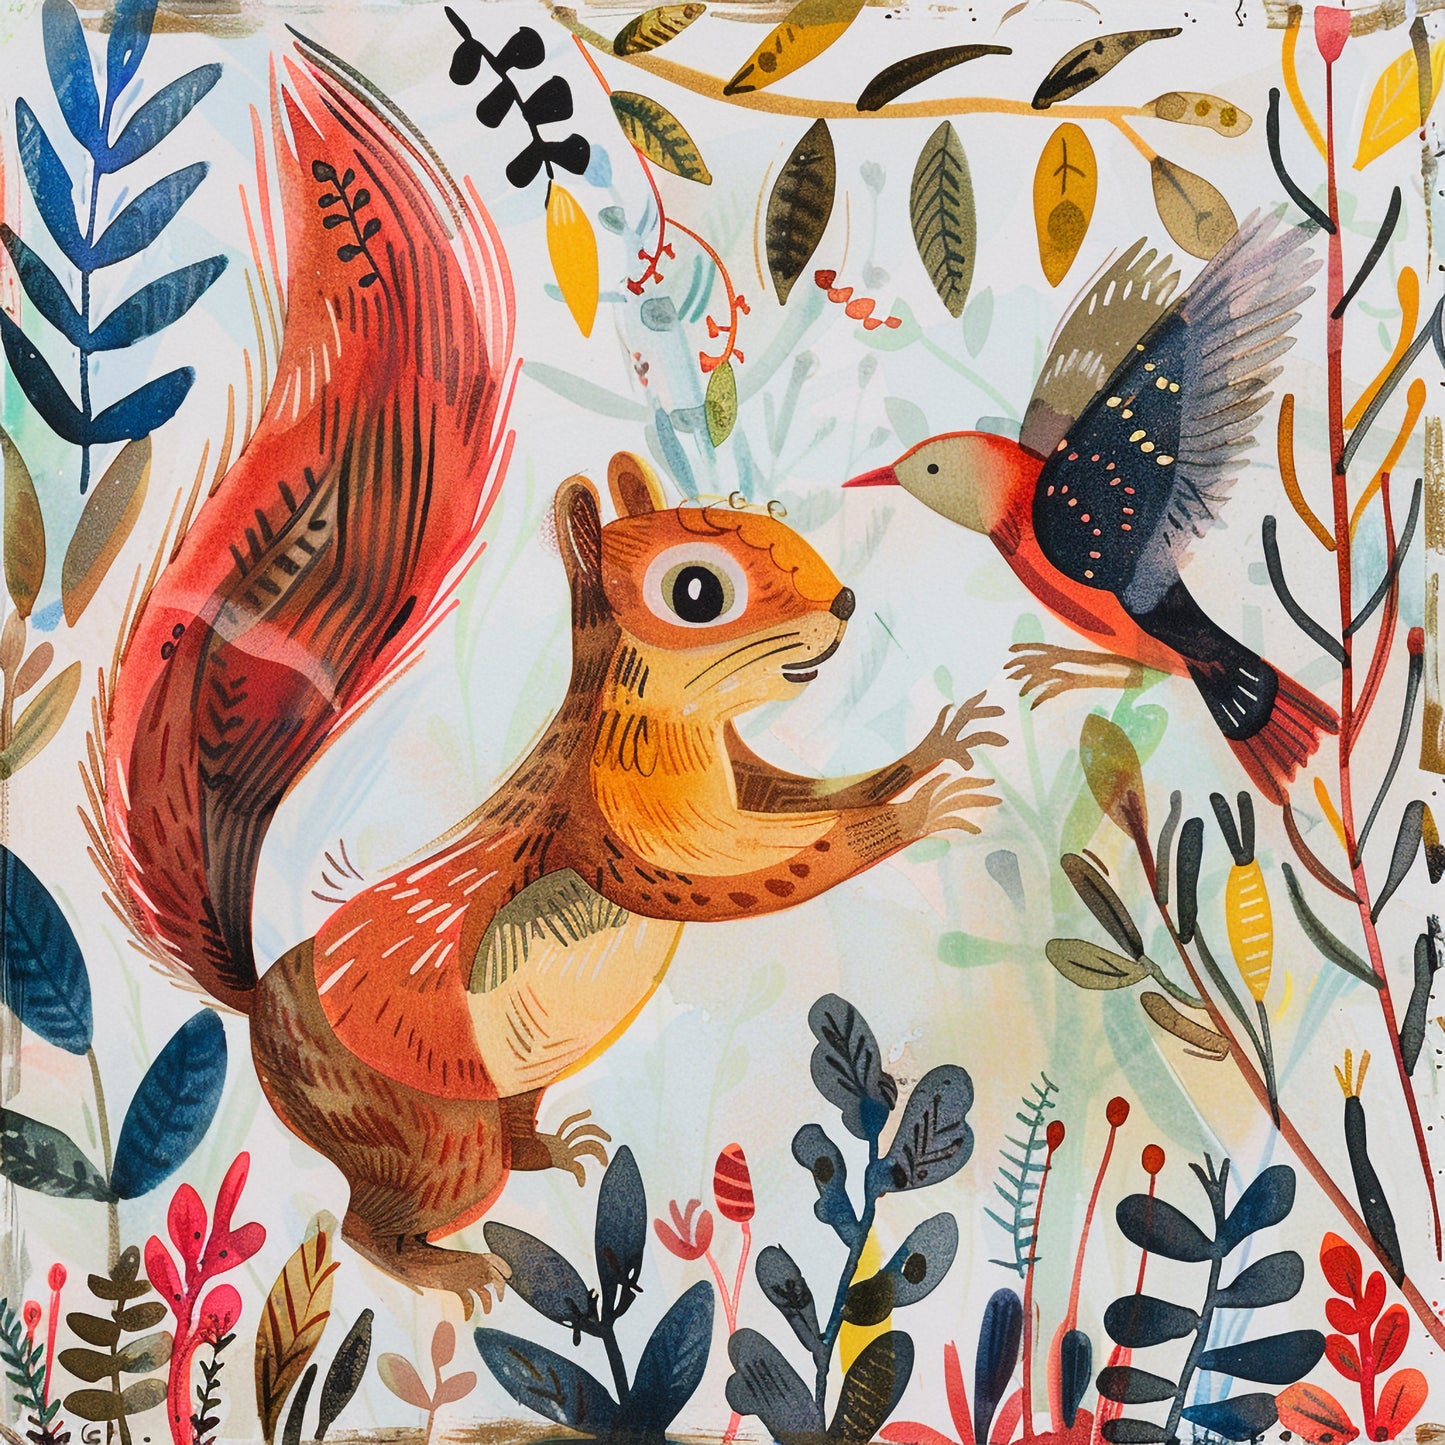 Playful Red Squirrel and Bird in a Colorful Forest Scenery